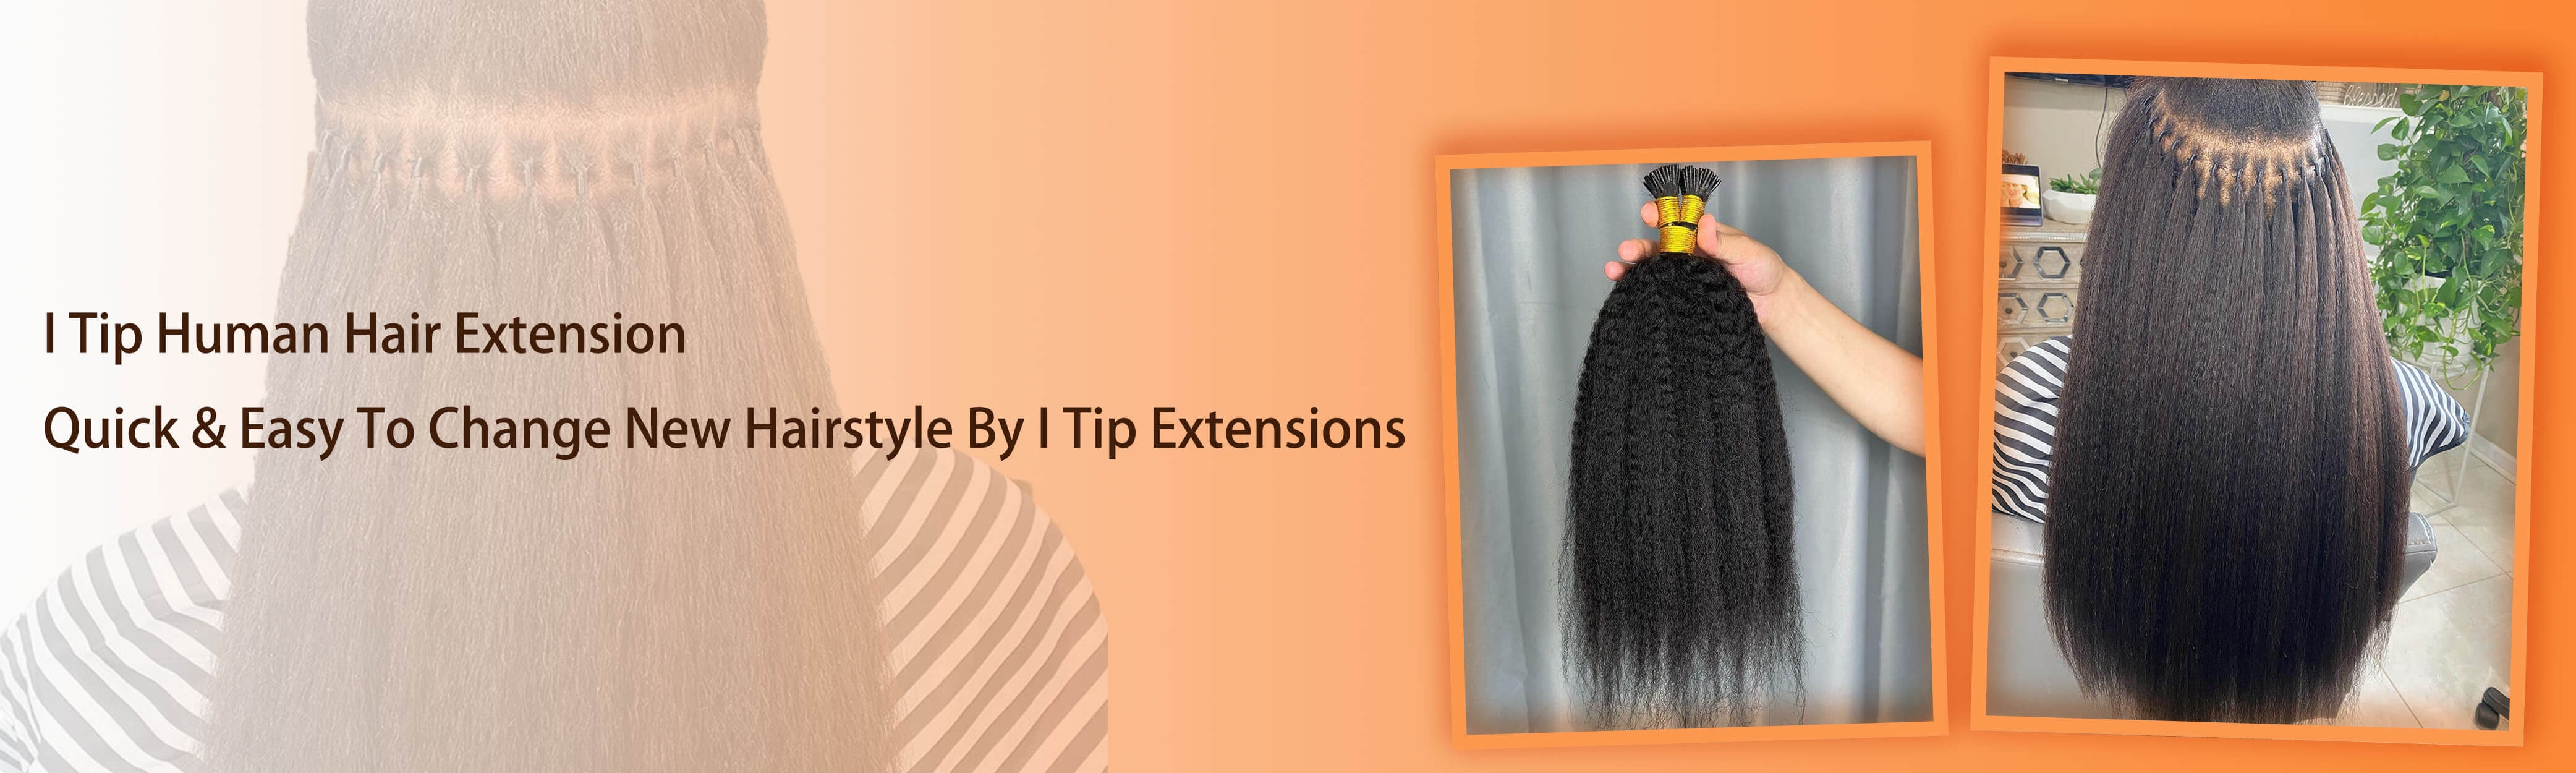 I Tip Hair Extensions 